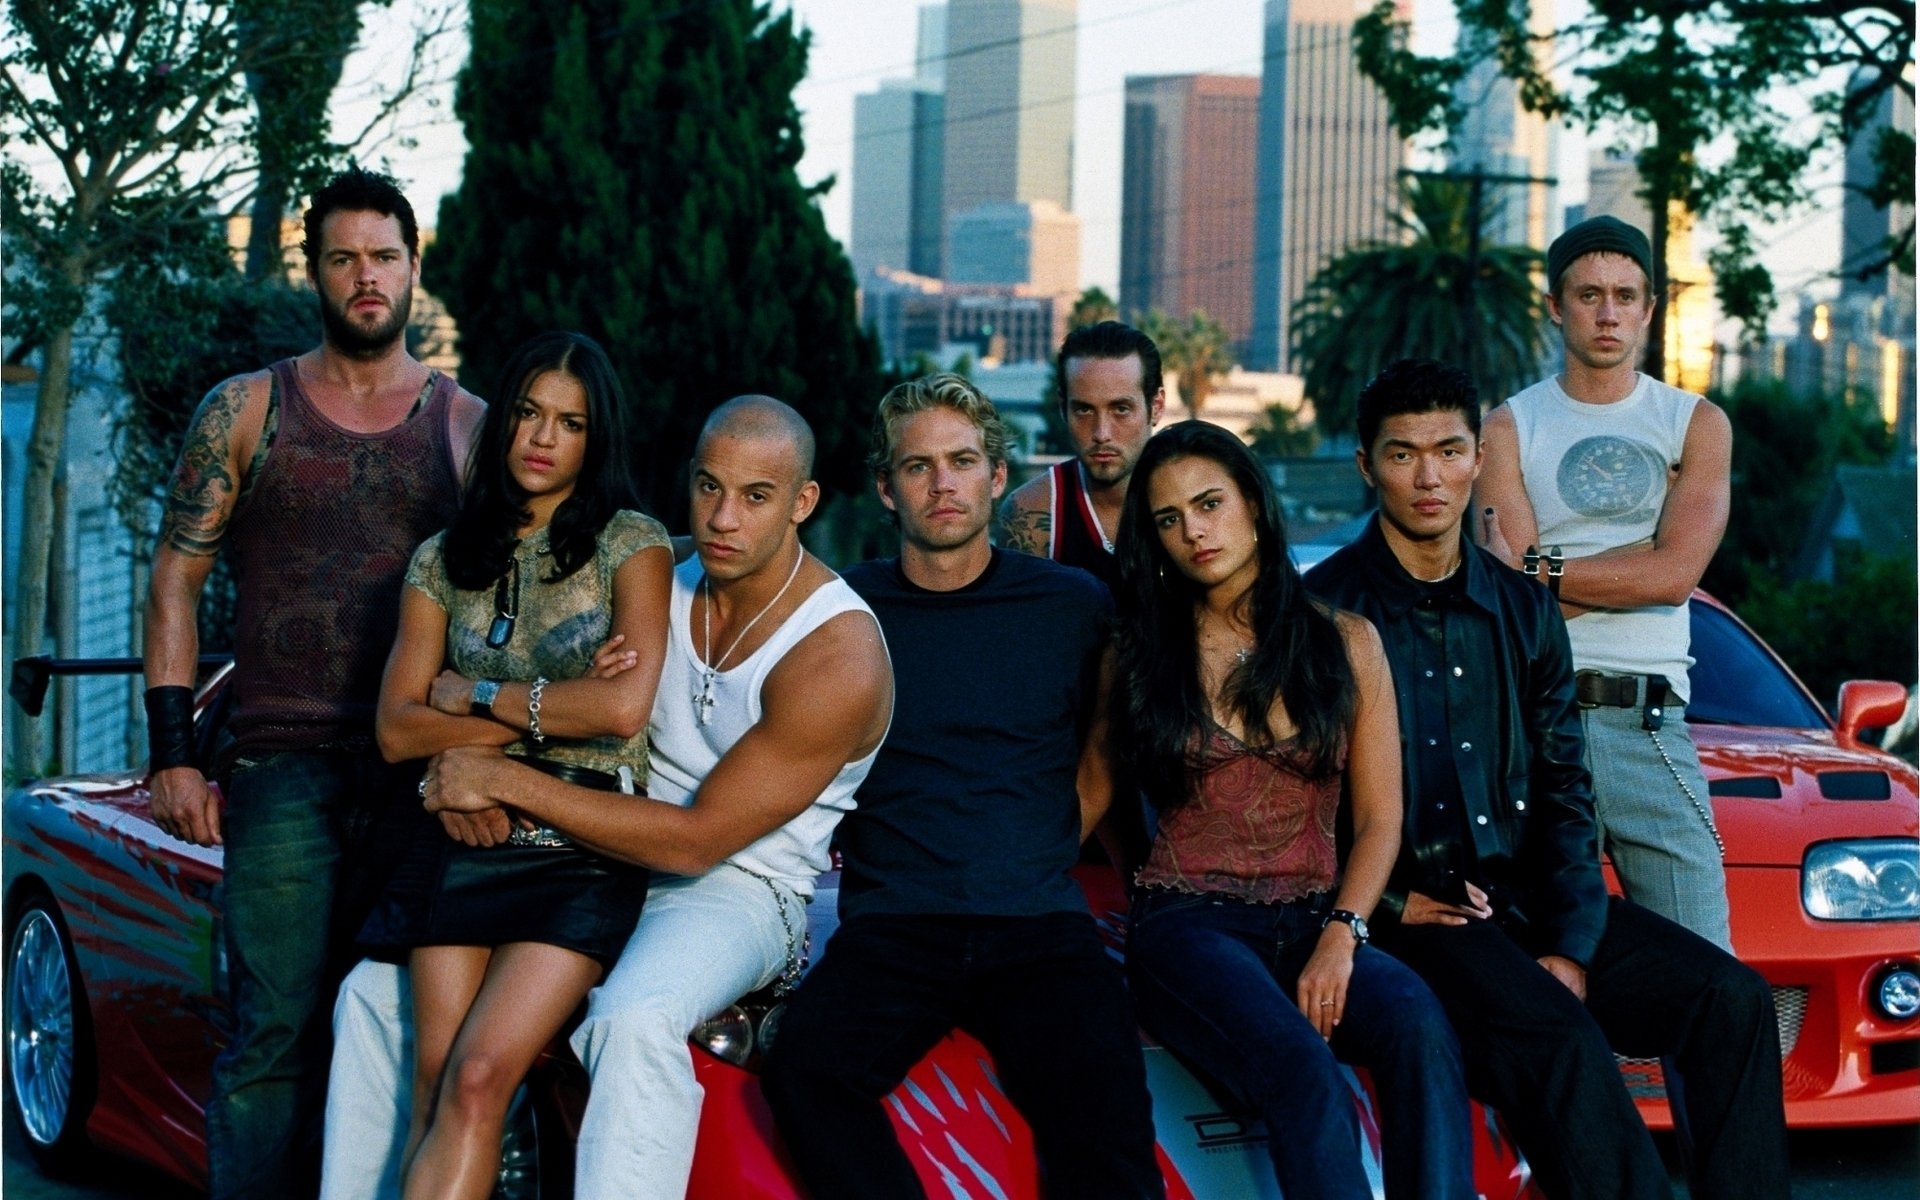 The Fast and the Furious, Vince, HD wallpapers, Background images, 1920x1200 HD Desktop